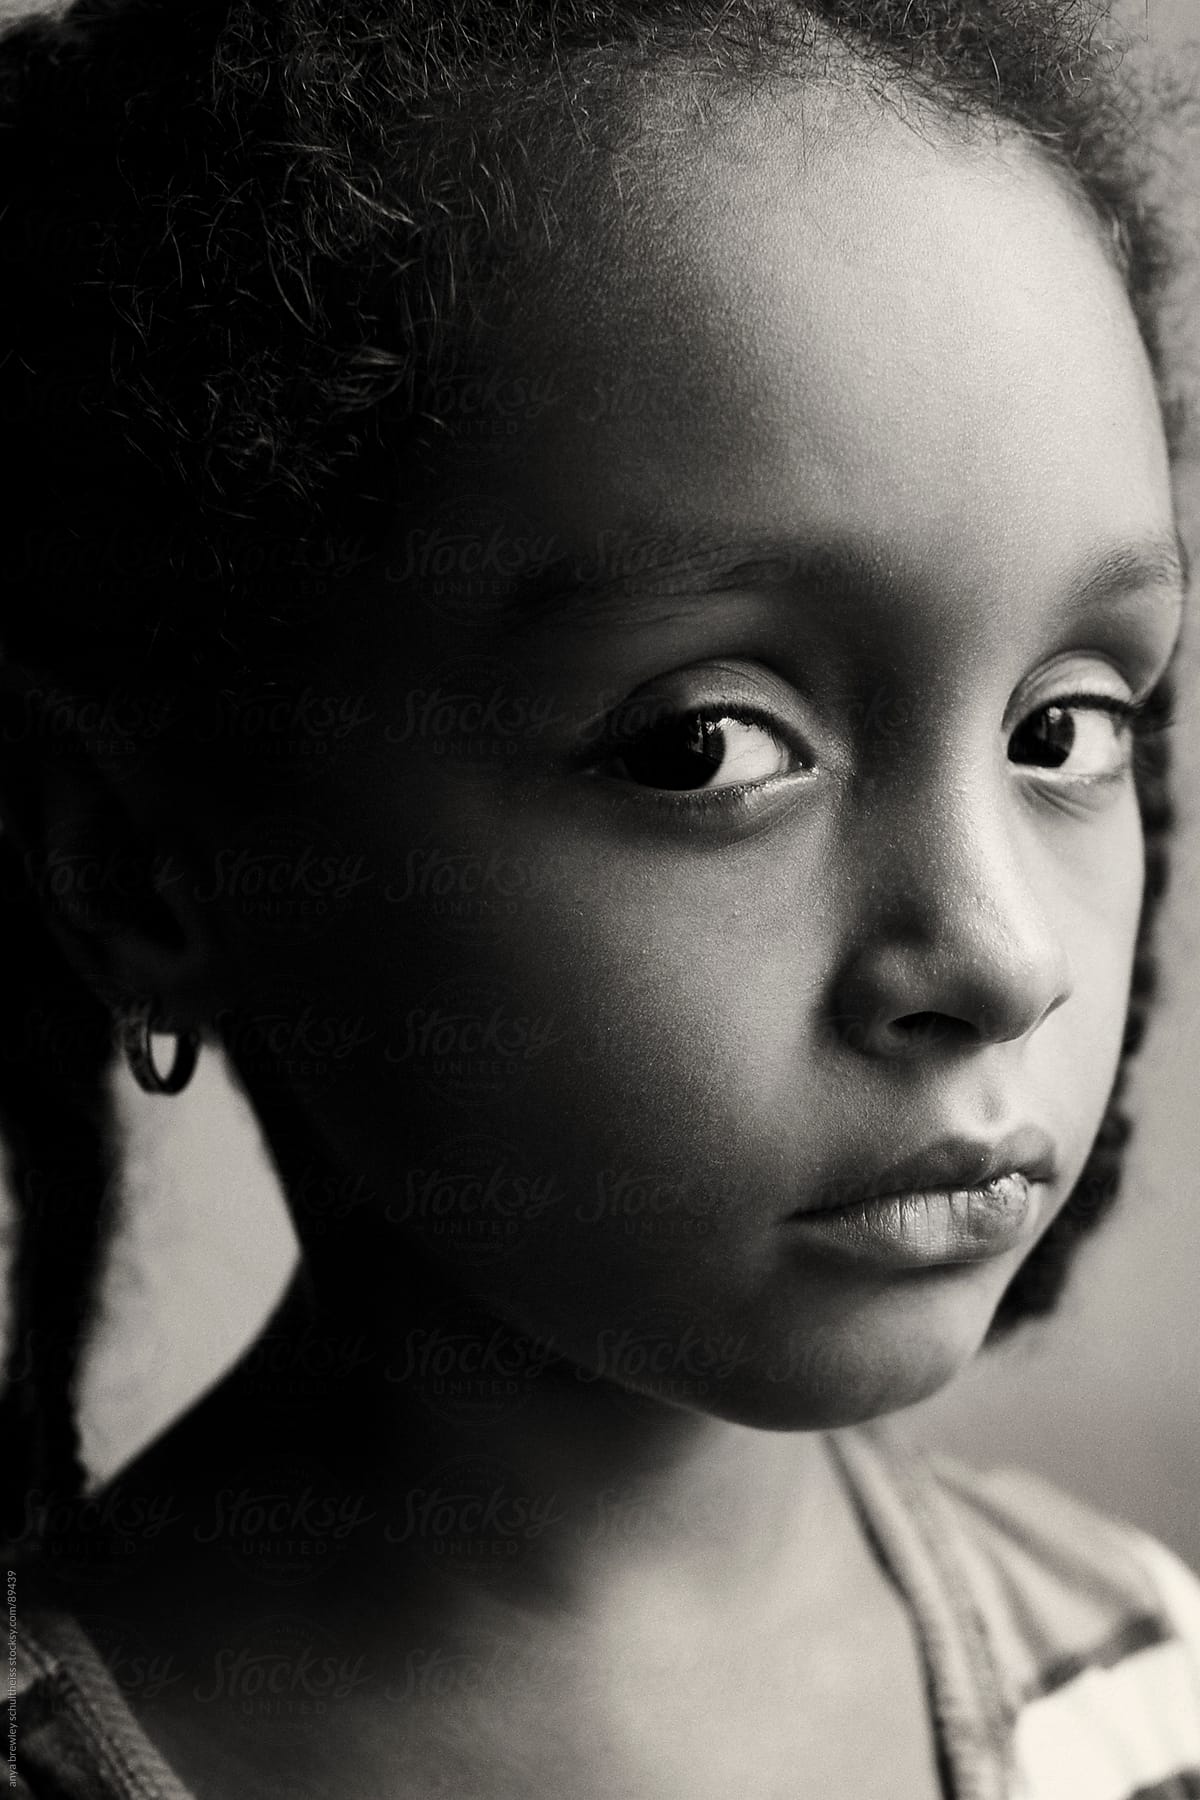 Portrait of young girl with a serious look on her face